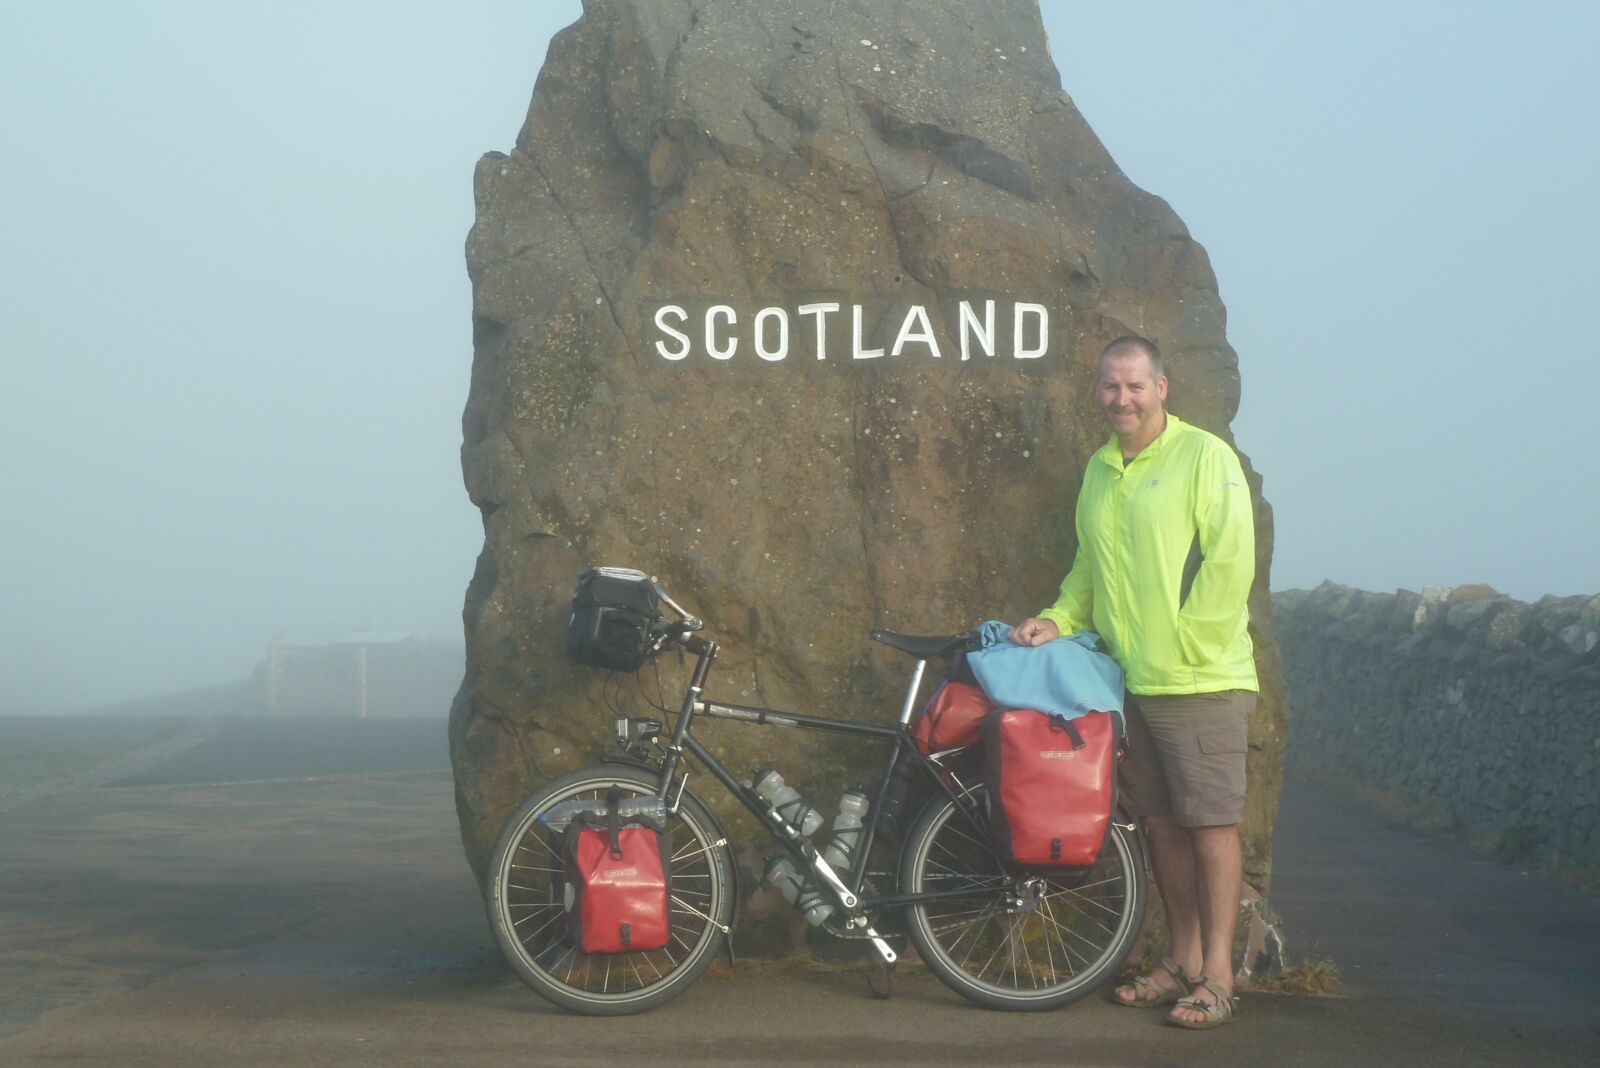 A person standing with a bike next to a large rock